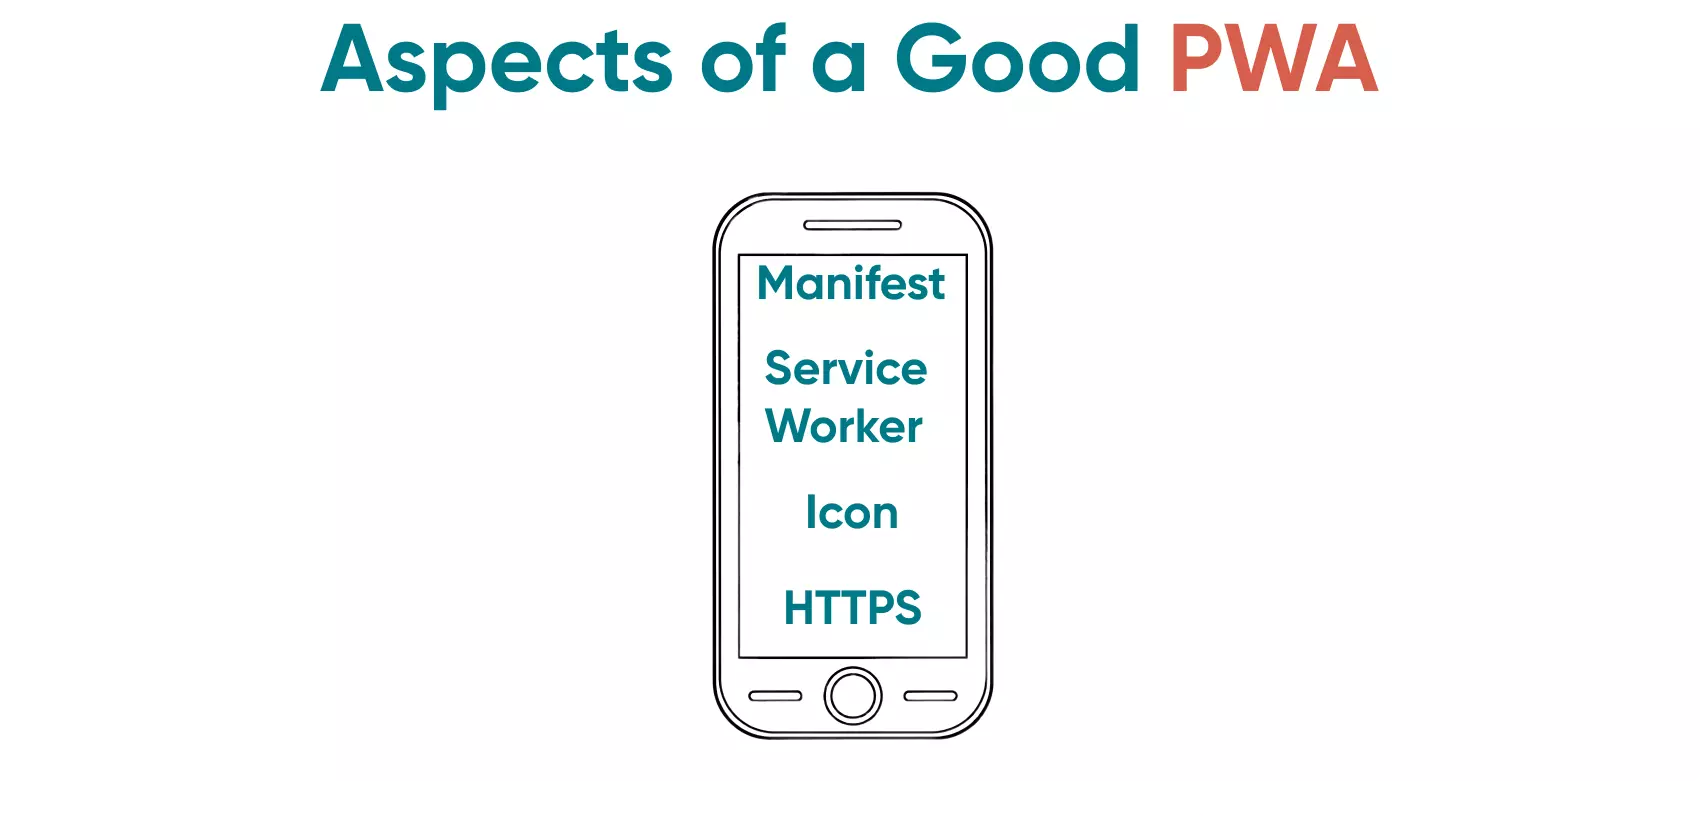 The aspects of of a good progressive web app can be subjective, but here are some of the more common.